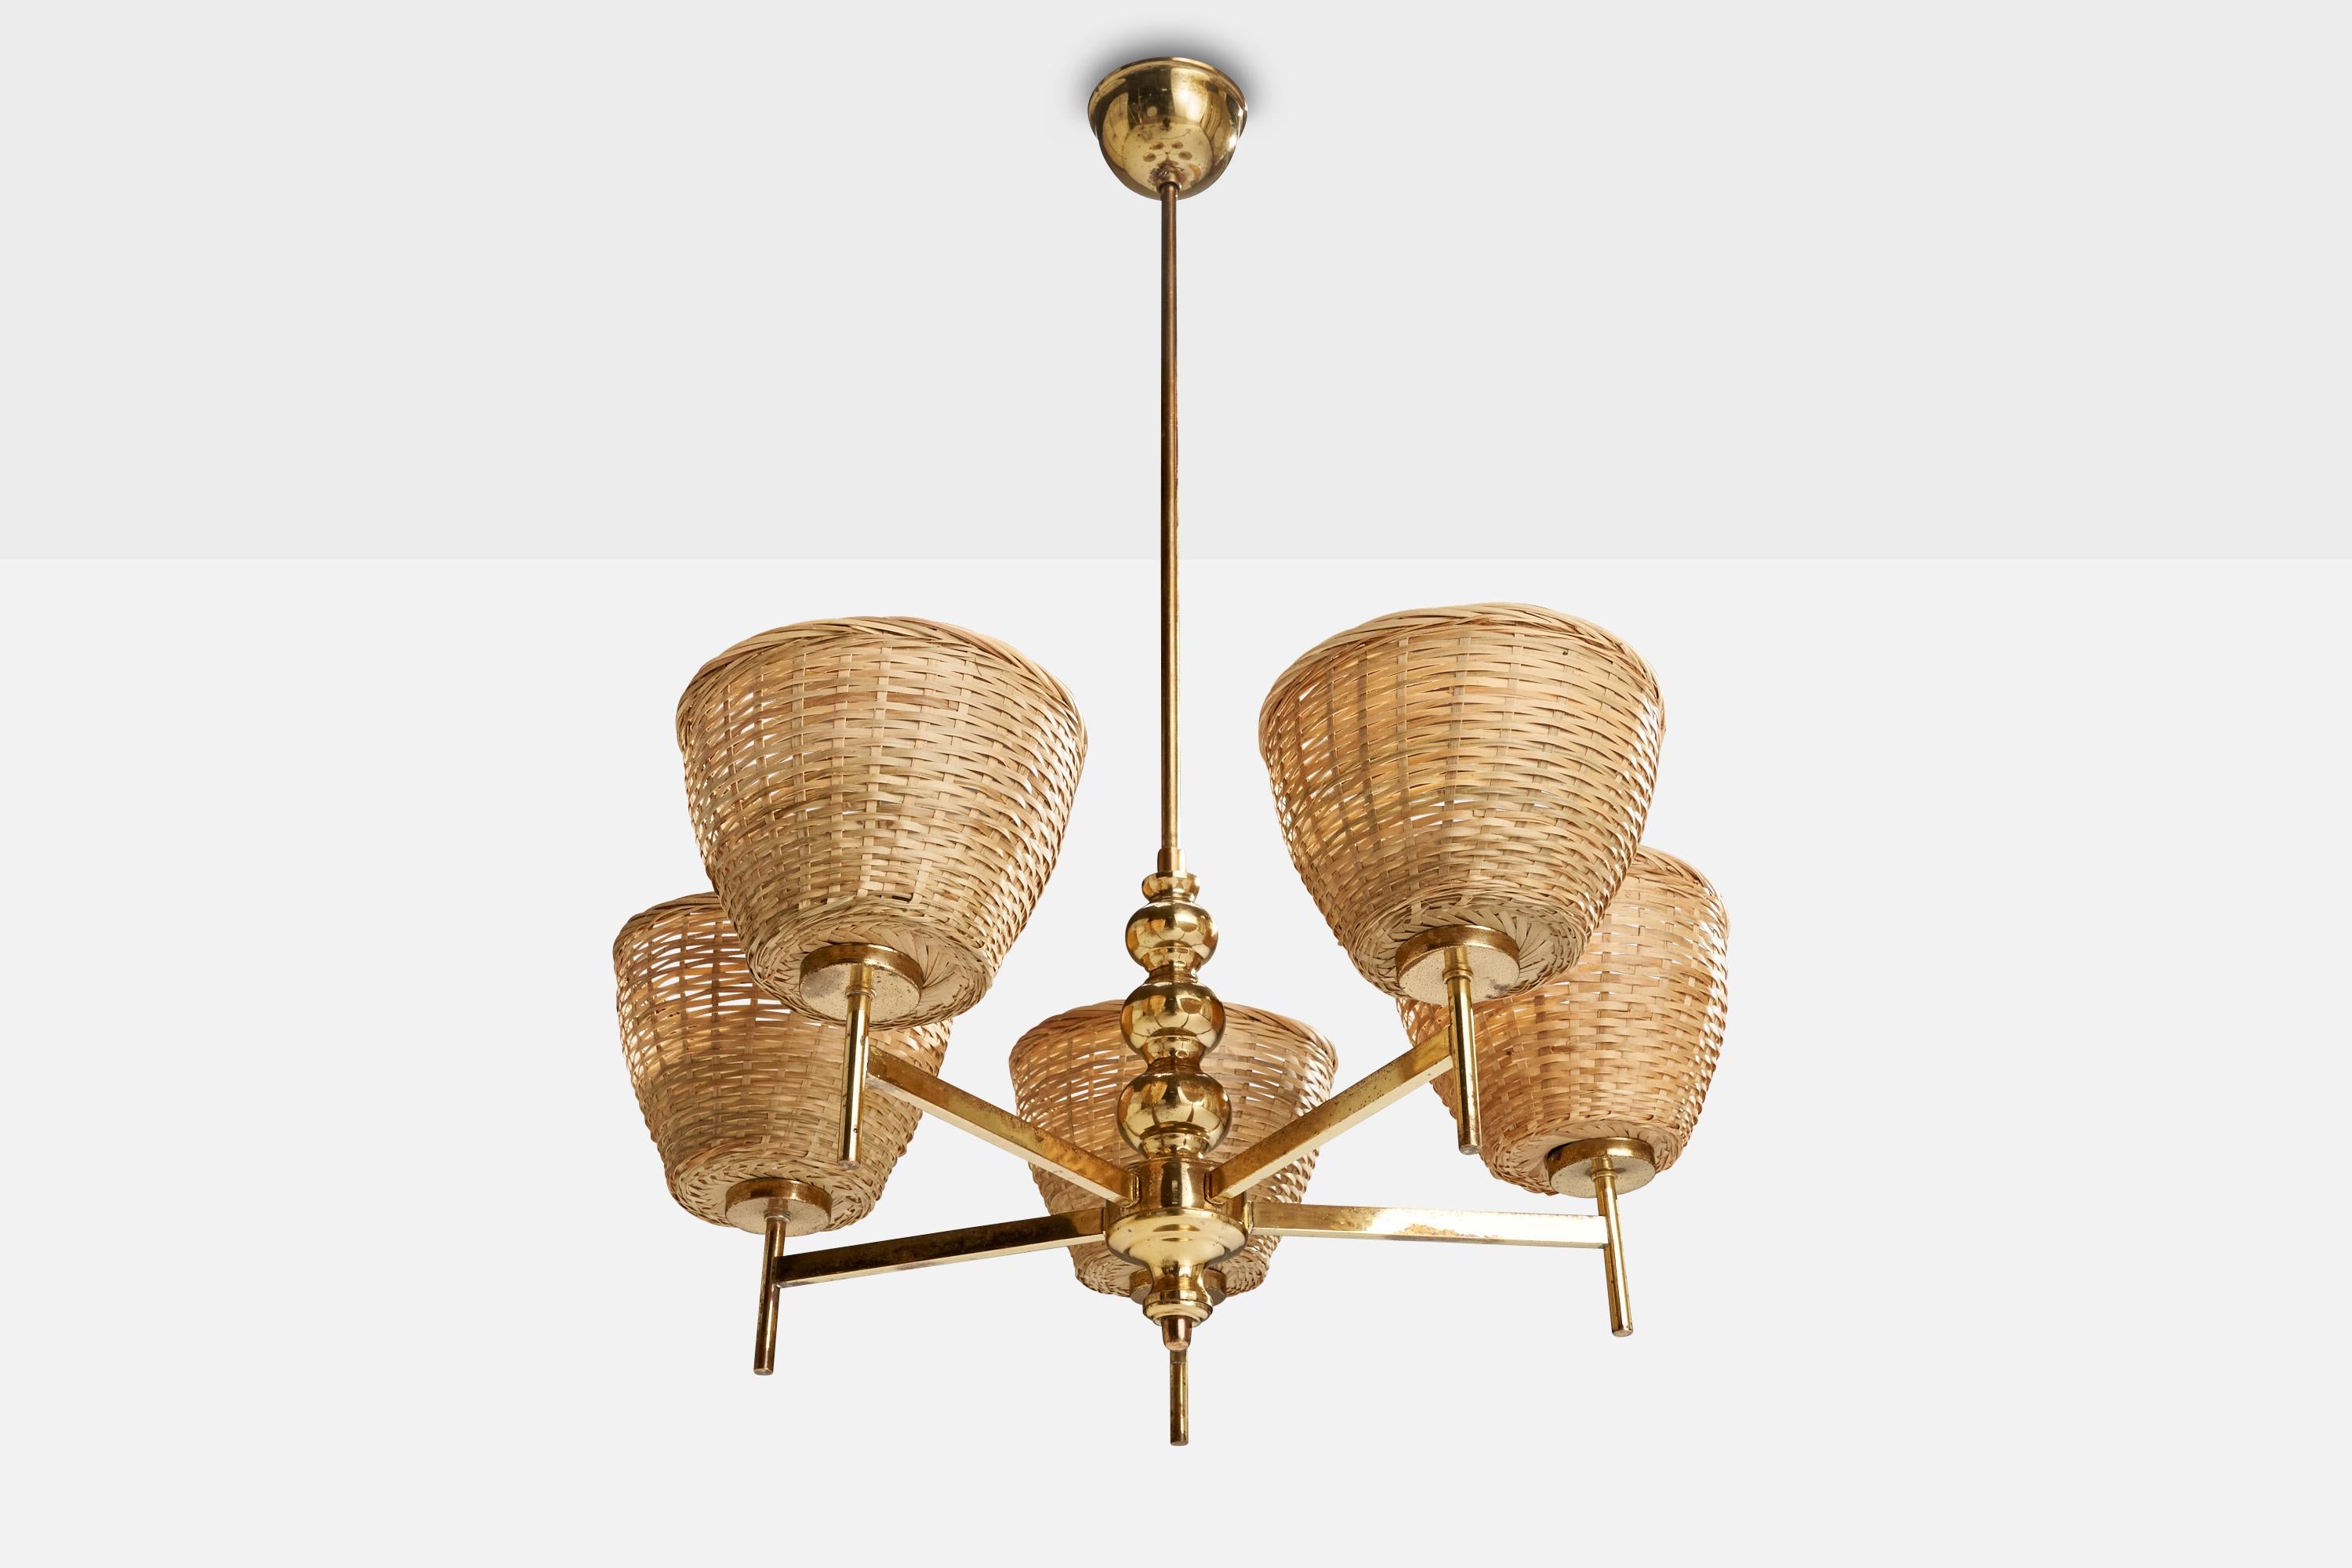 A brass and rattan chandelier designed and produced in Sweden, c. 1960s.

Dimensions of canopy (inches): 3.61” H x 2.28” Diameter
Socket takes standard E-26 bulbs. 5 socket.There is no maximum wattage stated on the fixture. All lighting will be